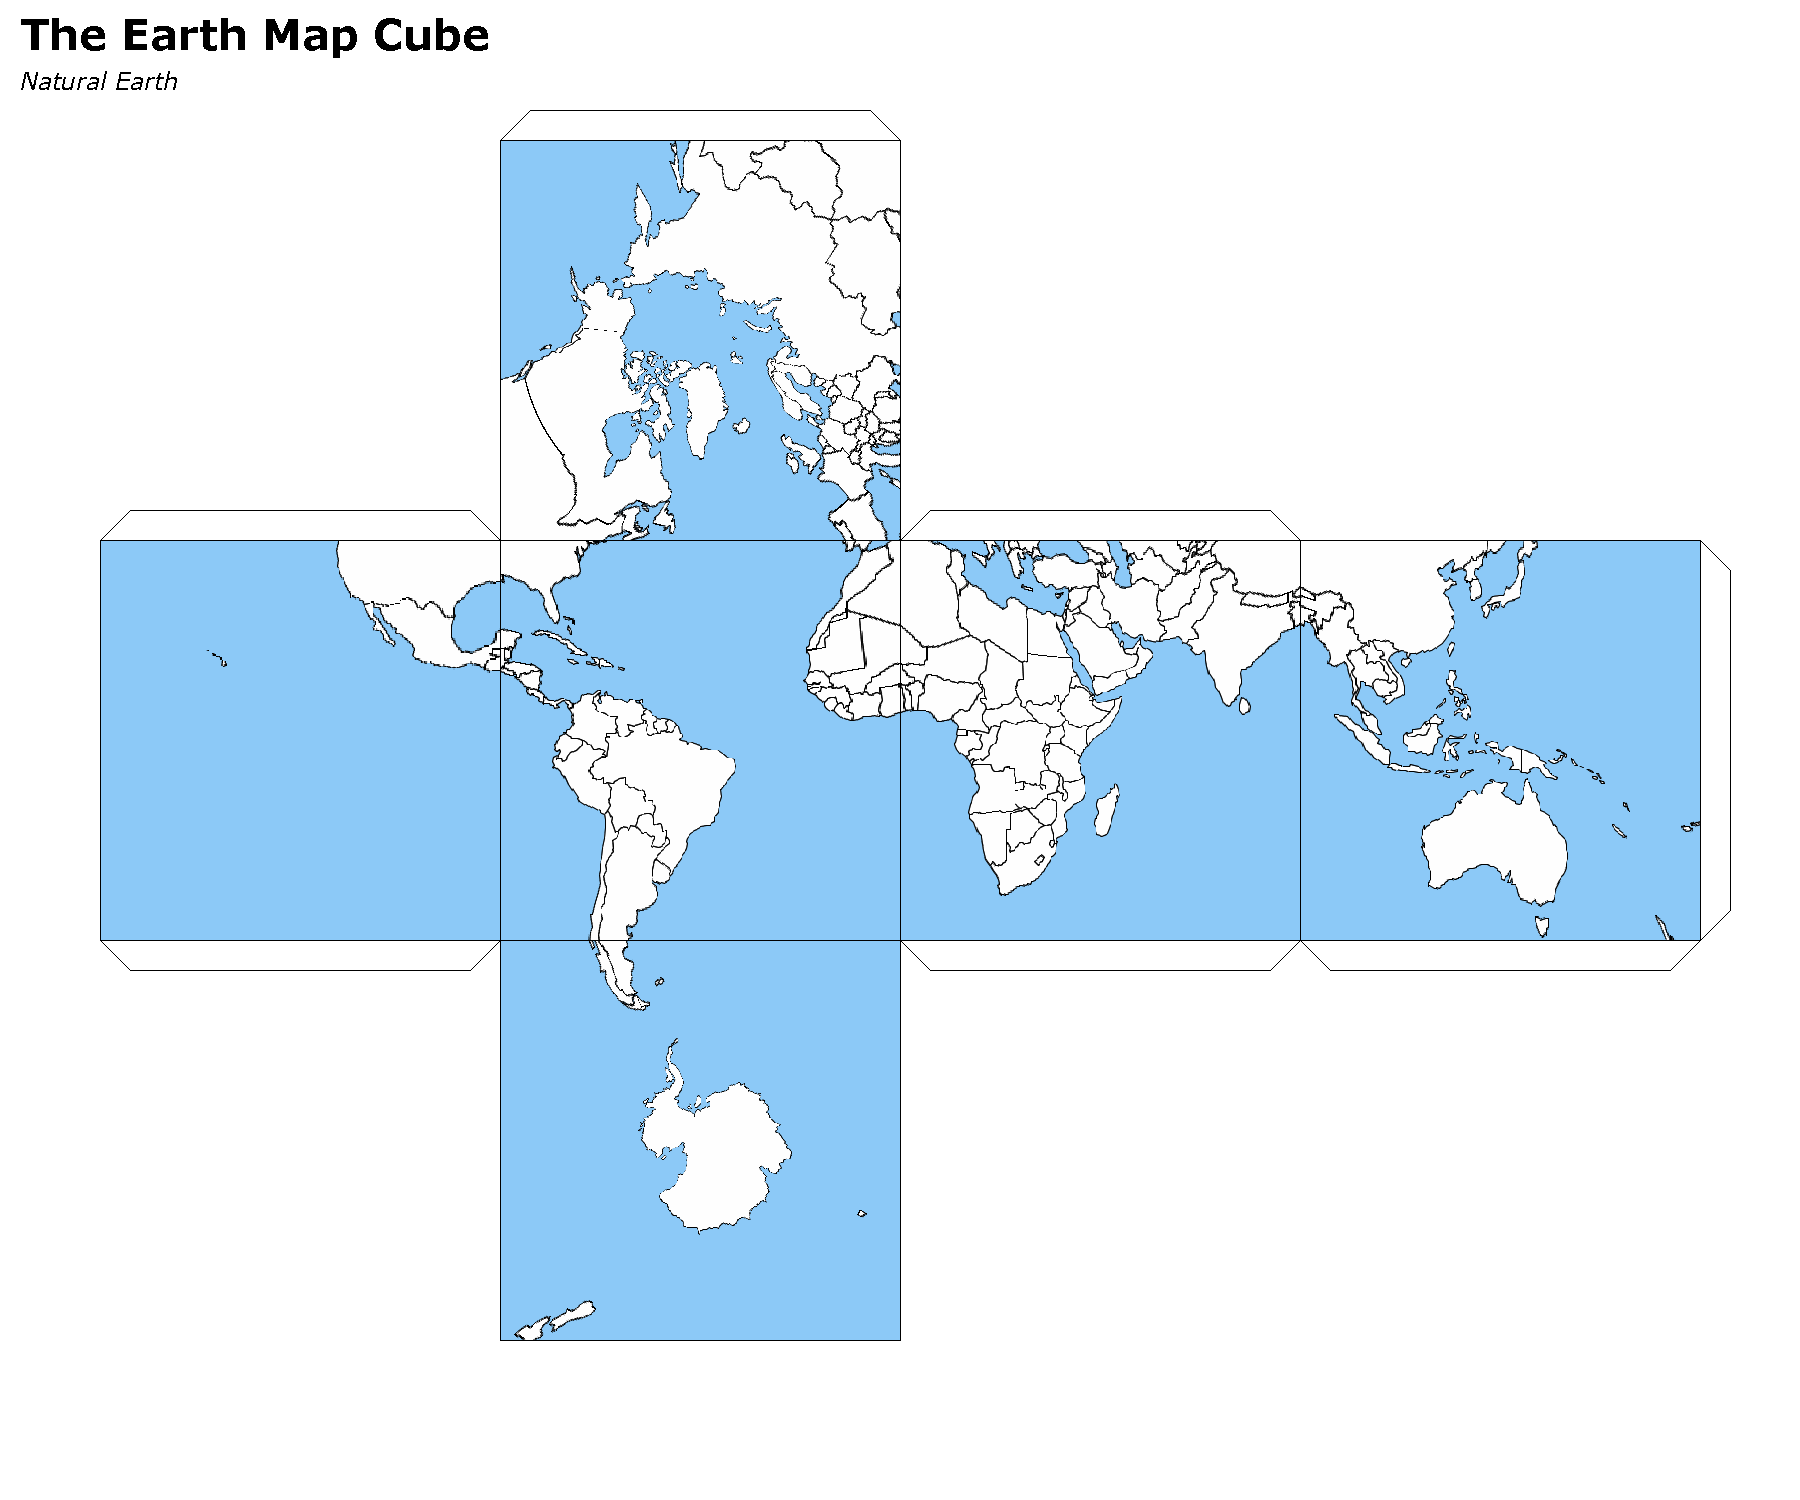 _images/map_cube.png